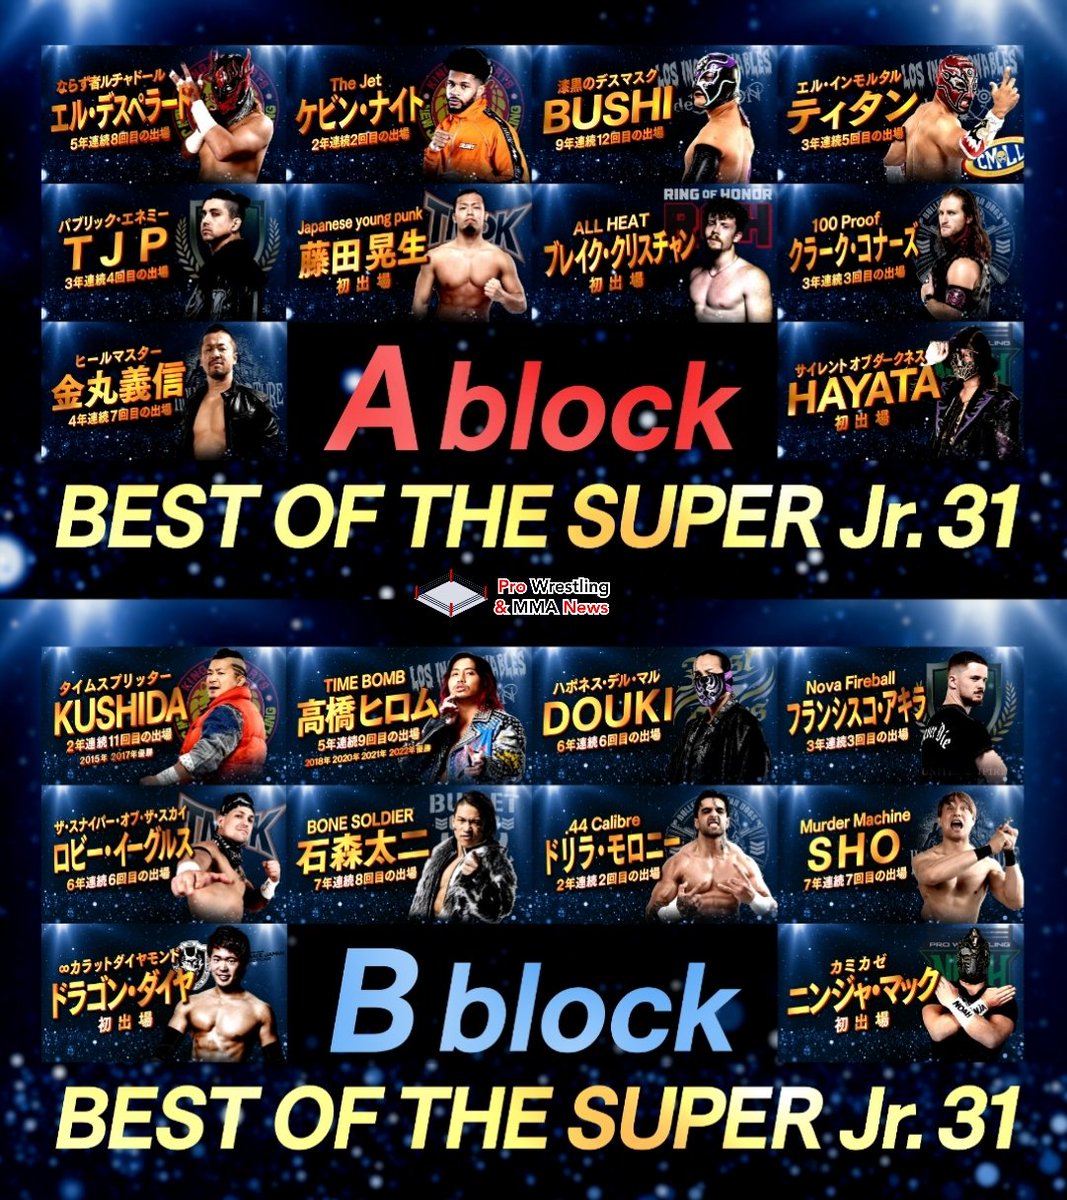 Here is the A & B block for #BOSJ31